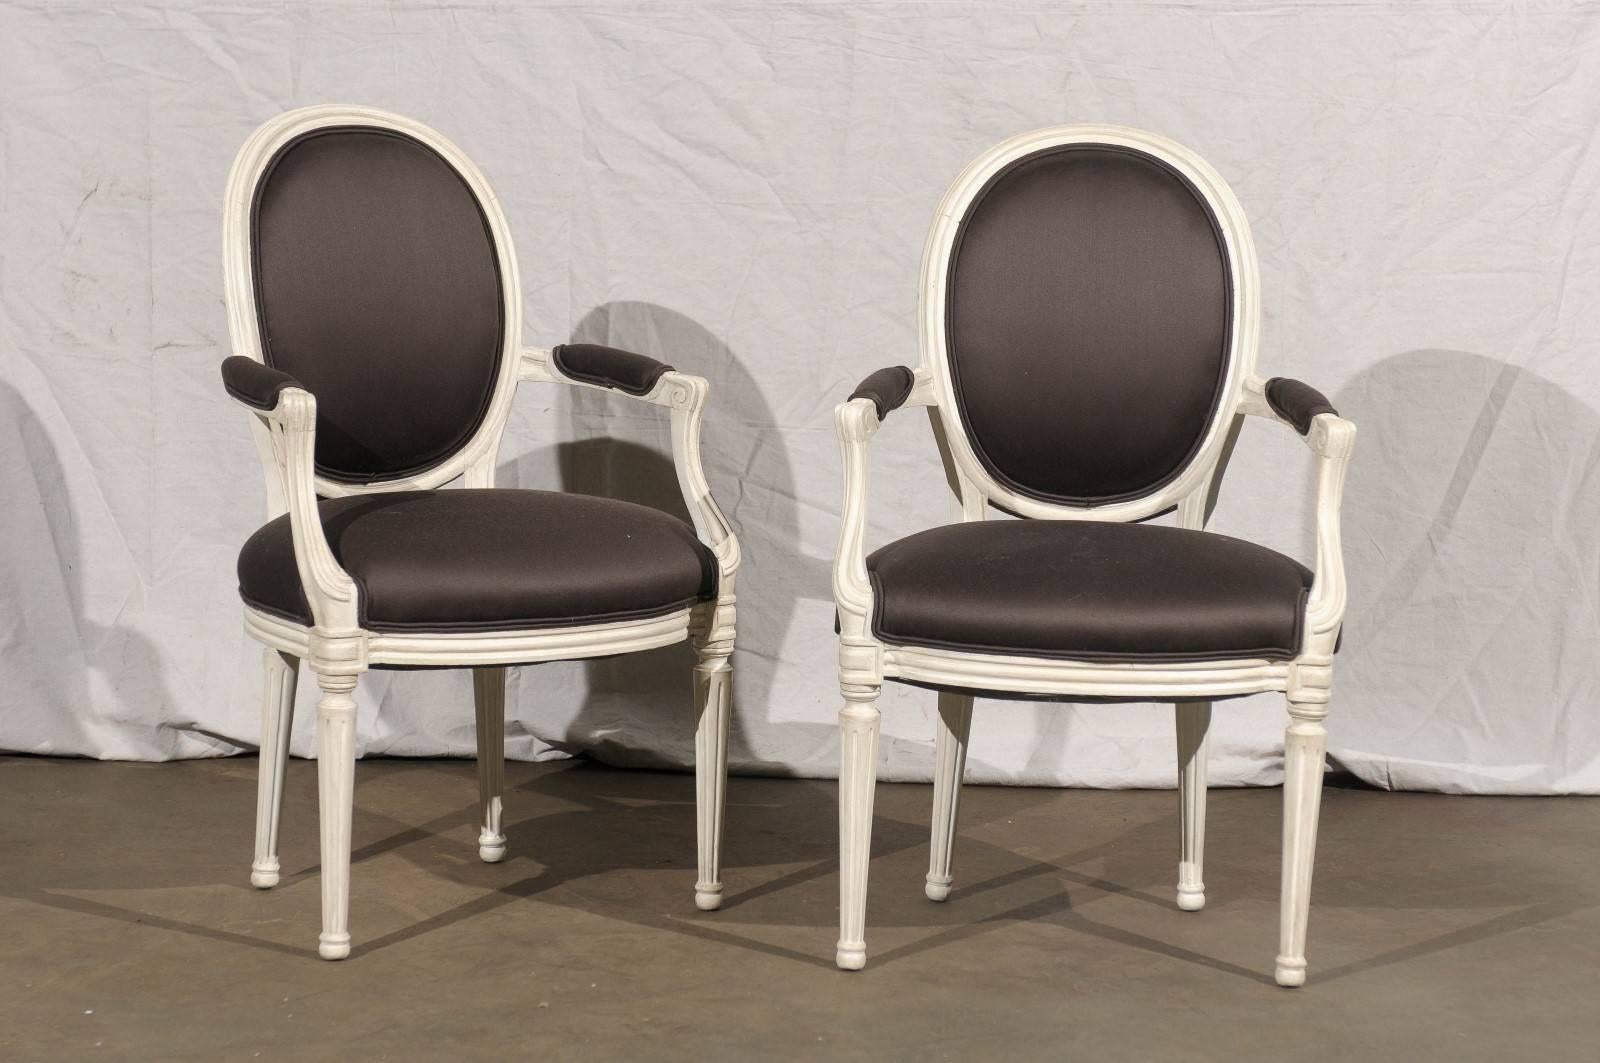 Pair of 20th century painted Louis XVI style armchairs.